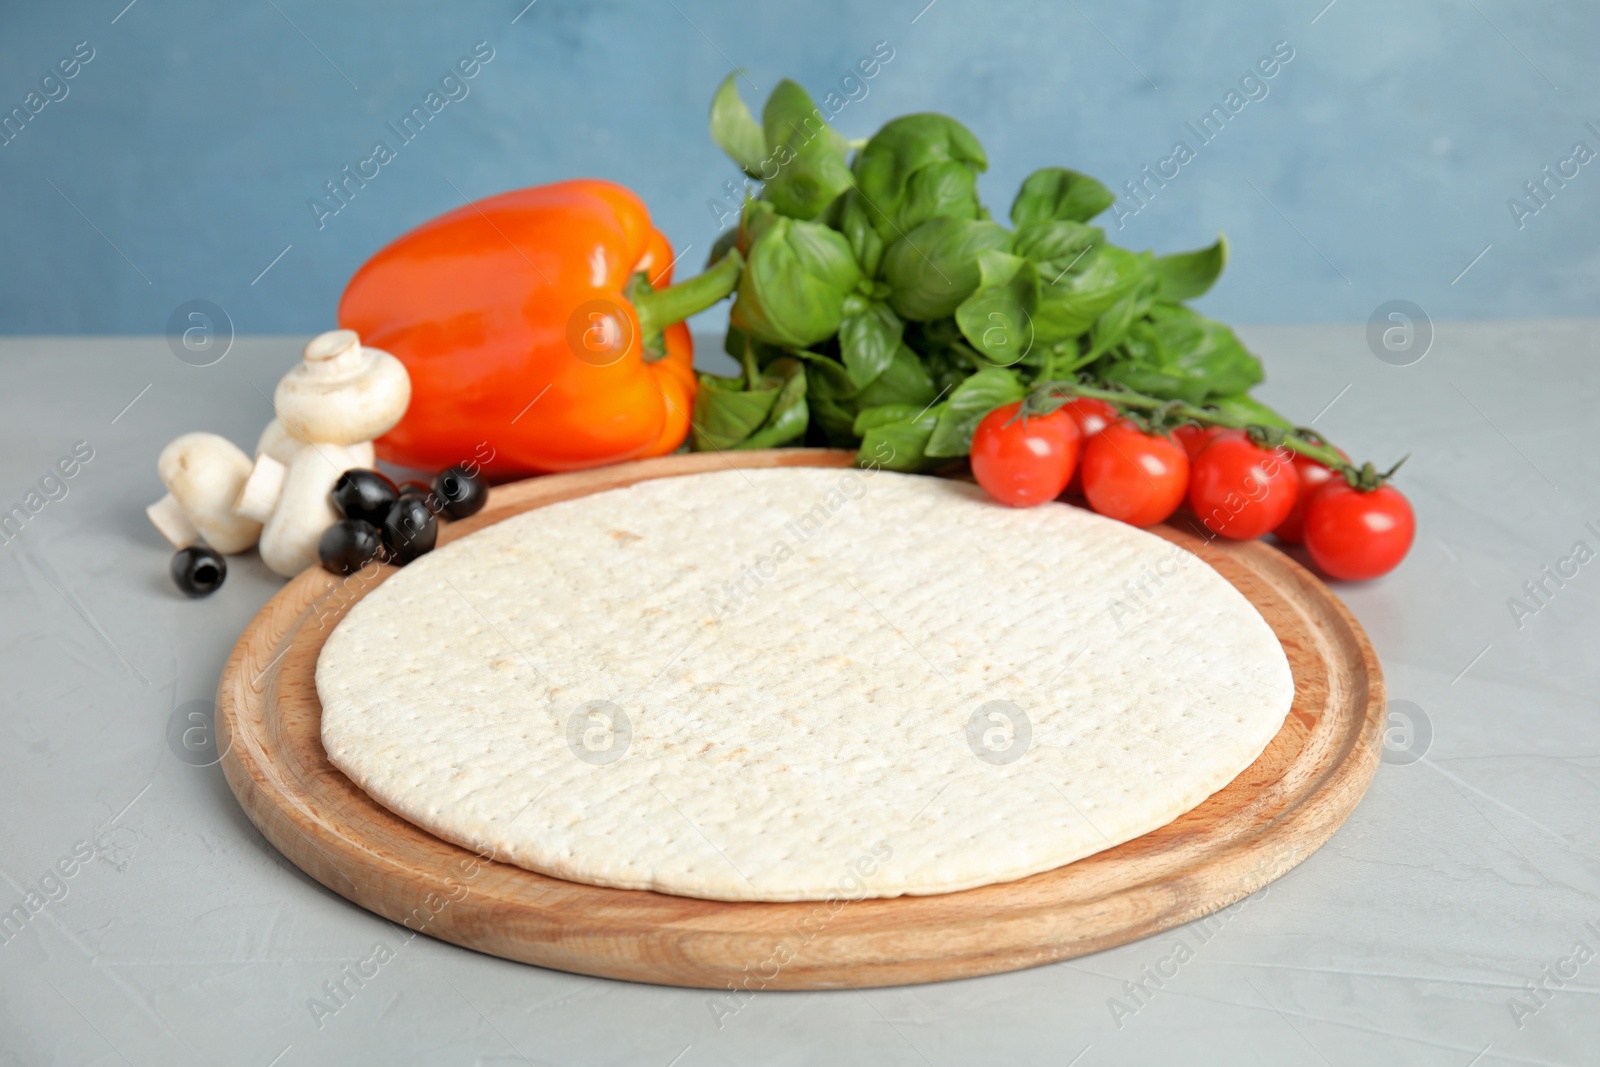 Photo of Base and ingredients for pizza on table against color background